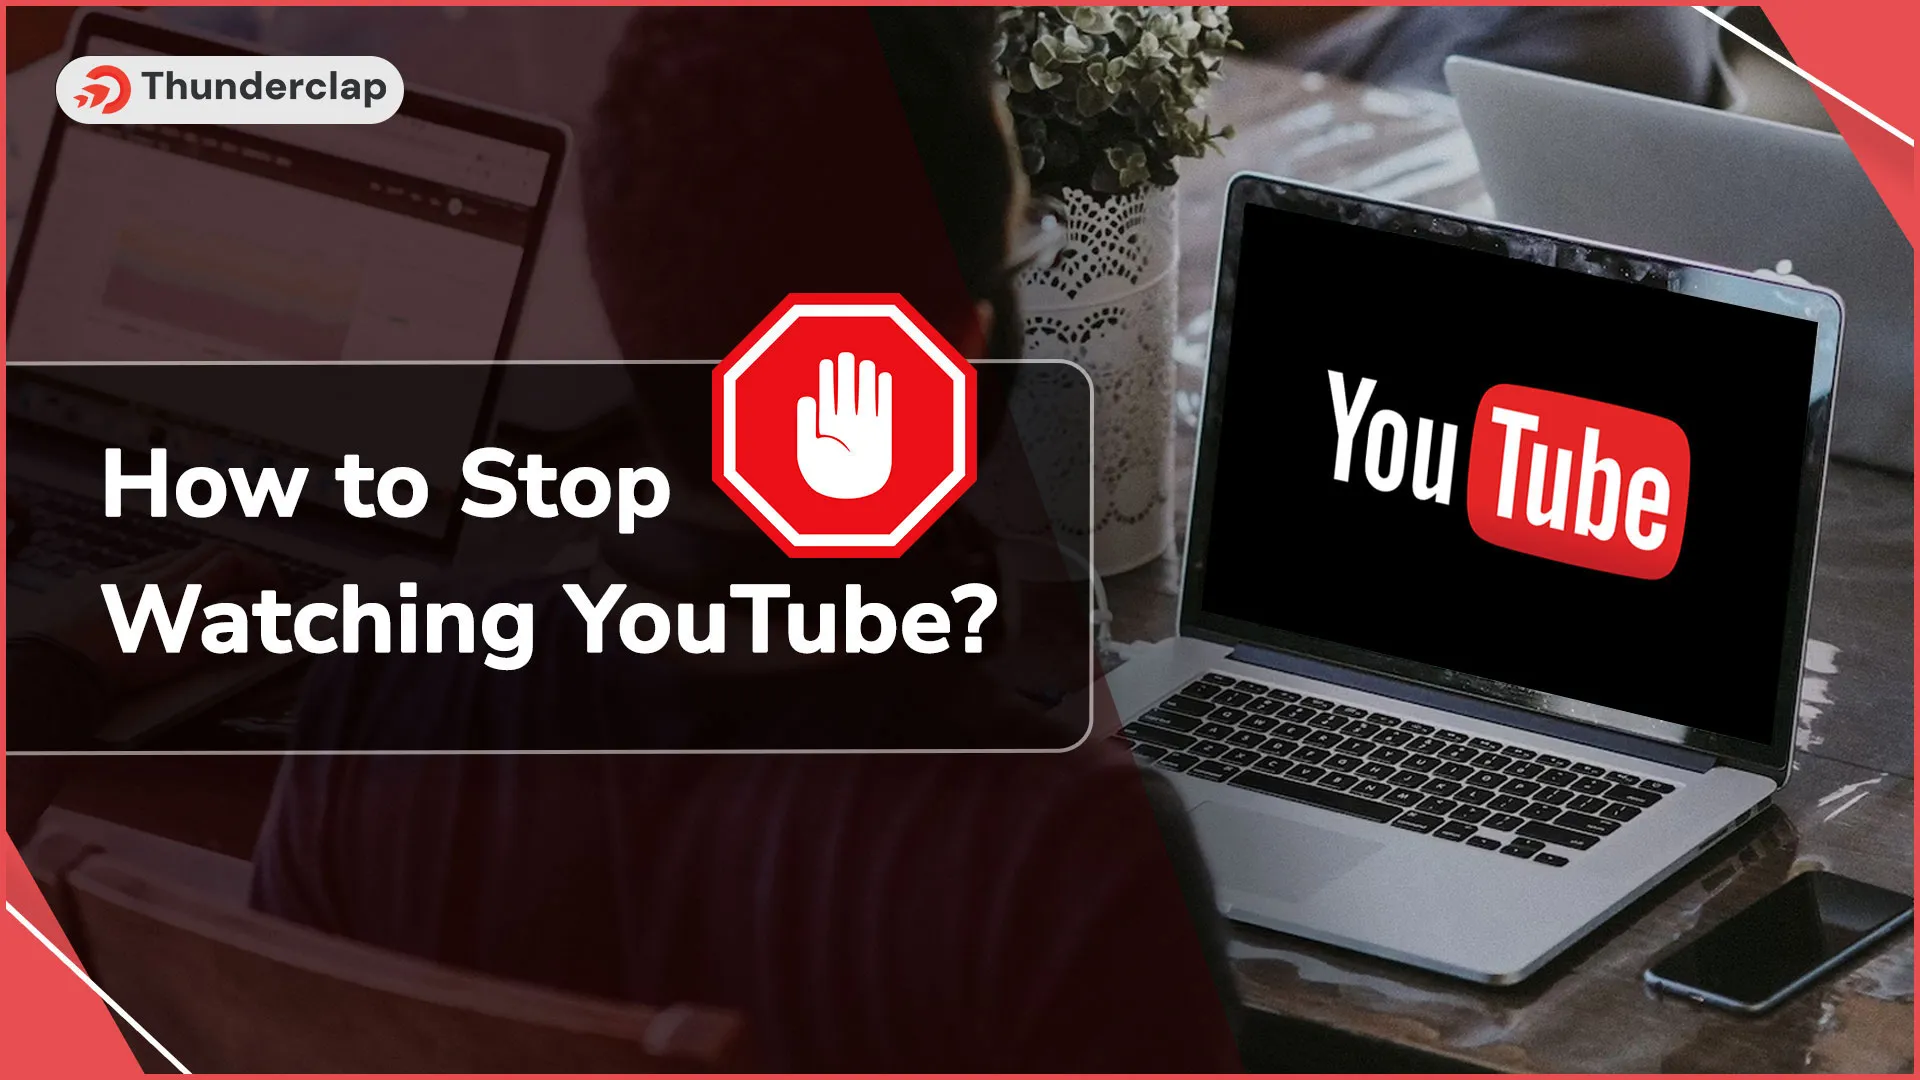 How To Stop Watching YouTube